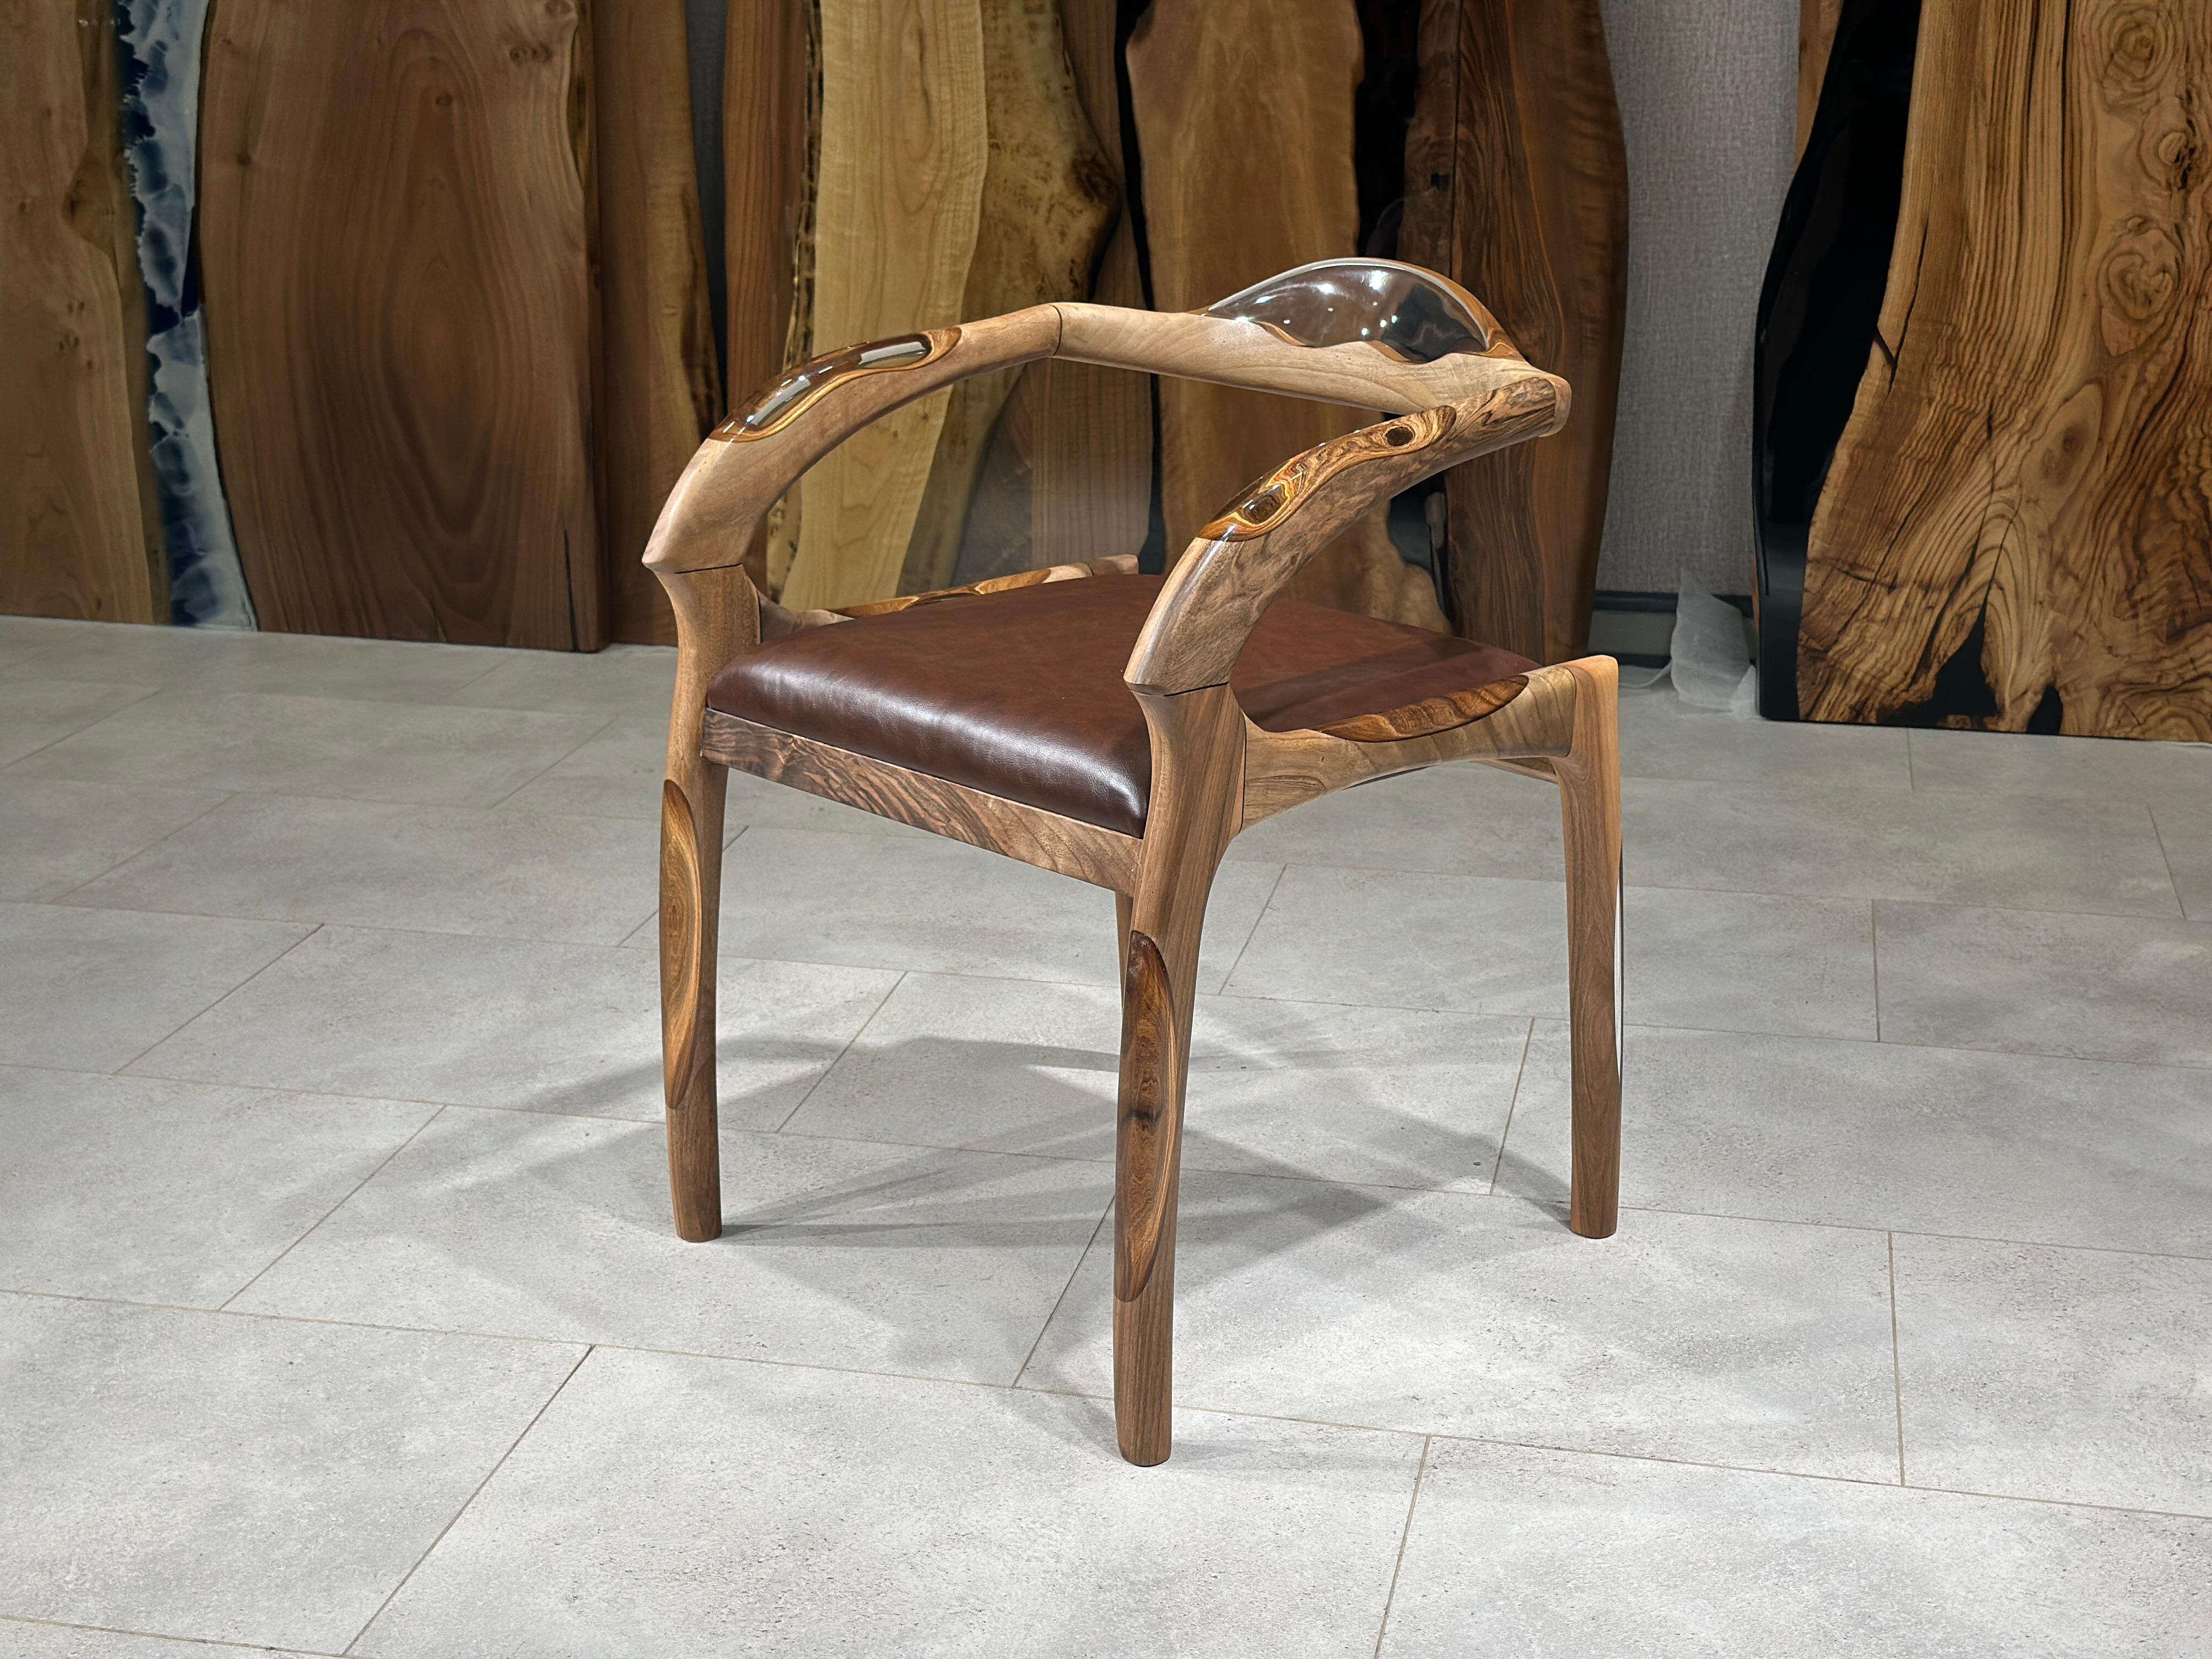 WALNUT EPOXY CHAIR


Check out our Walnut Wood & Epoxy Chair – a sturdy and good-looking seat for your place. It's made with strong walnut wood that has cool patterns. 

This chair is made of solid walnut wood & epoxy resin. Epoxy colour can be made